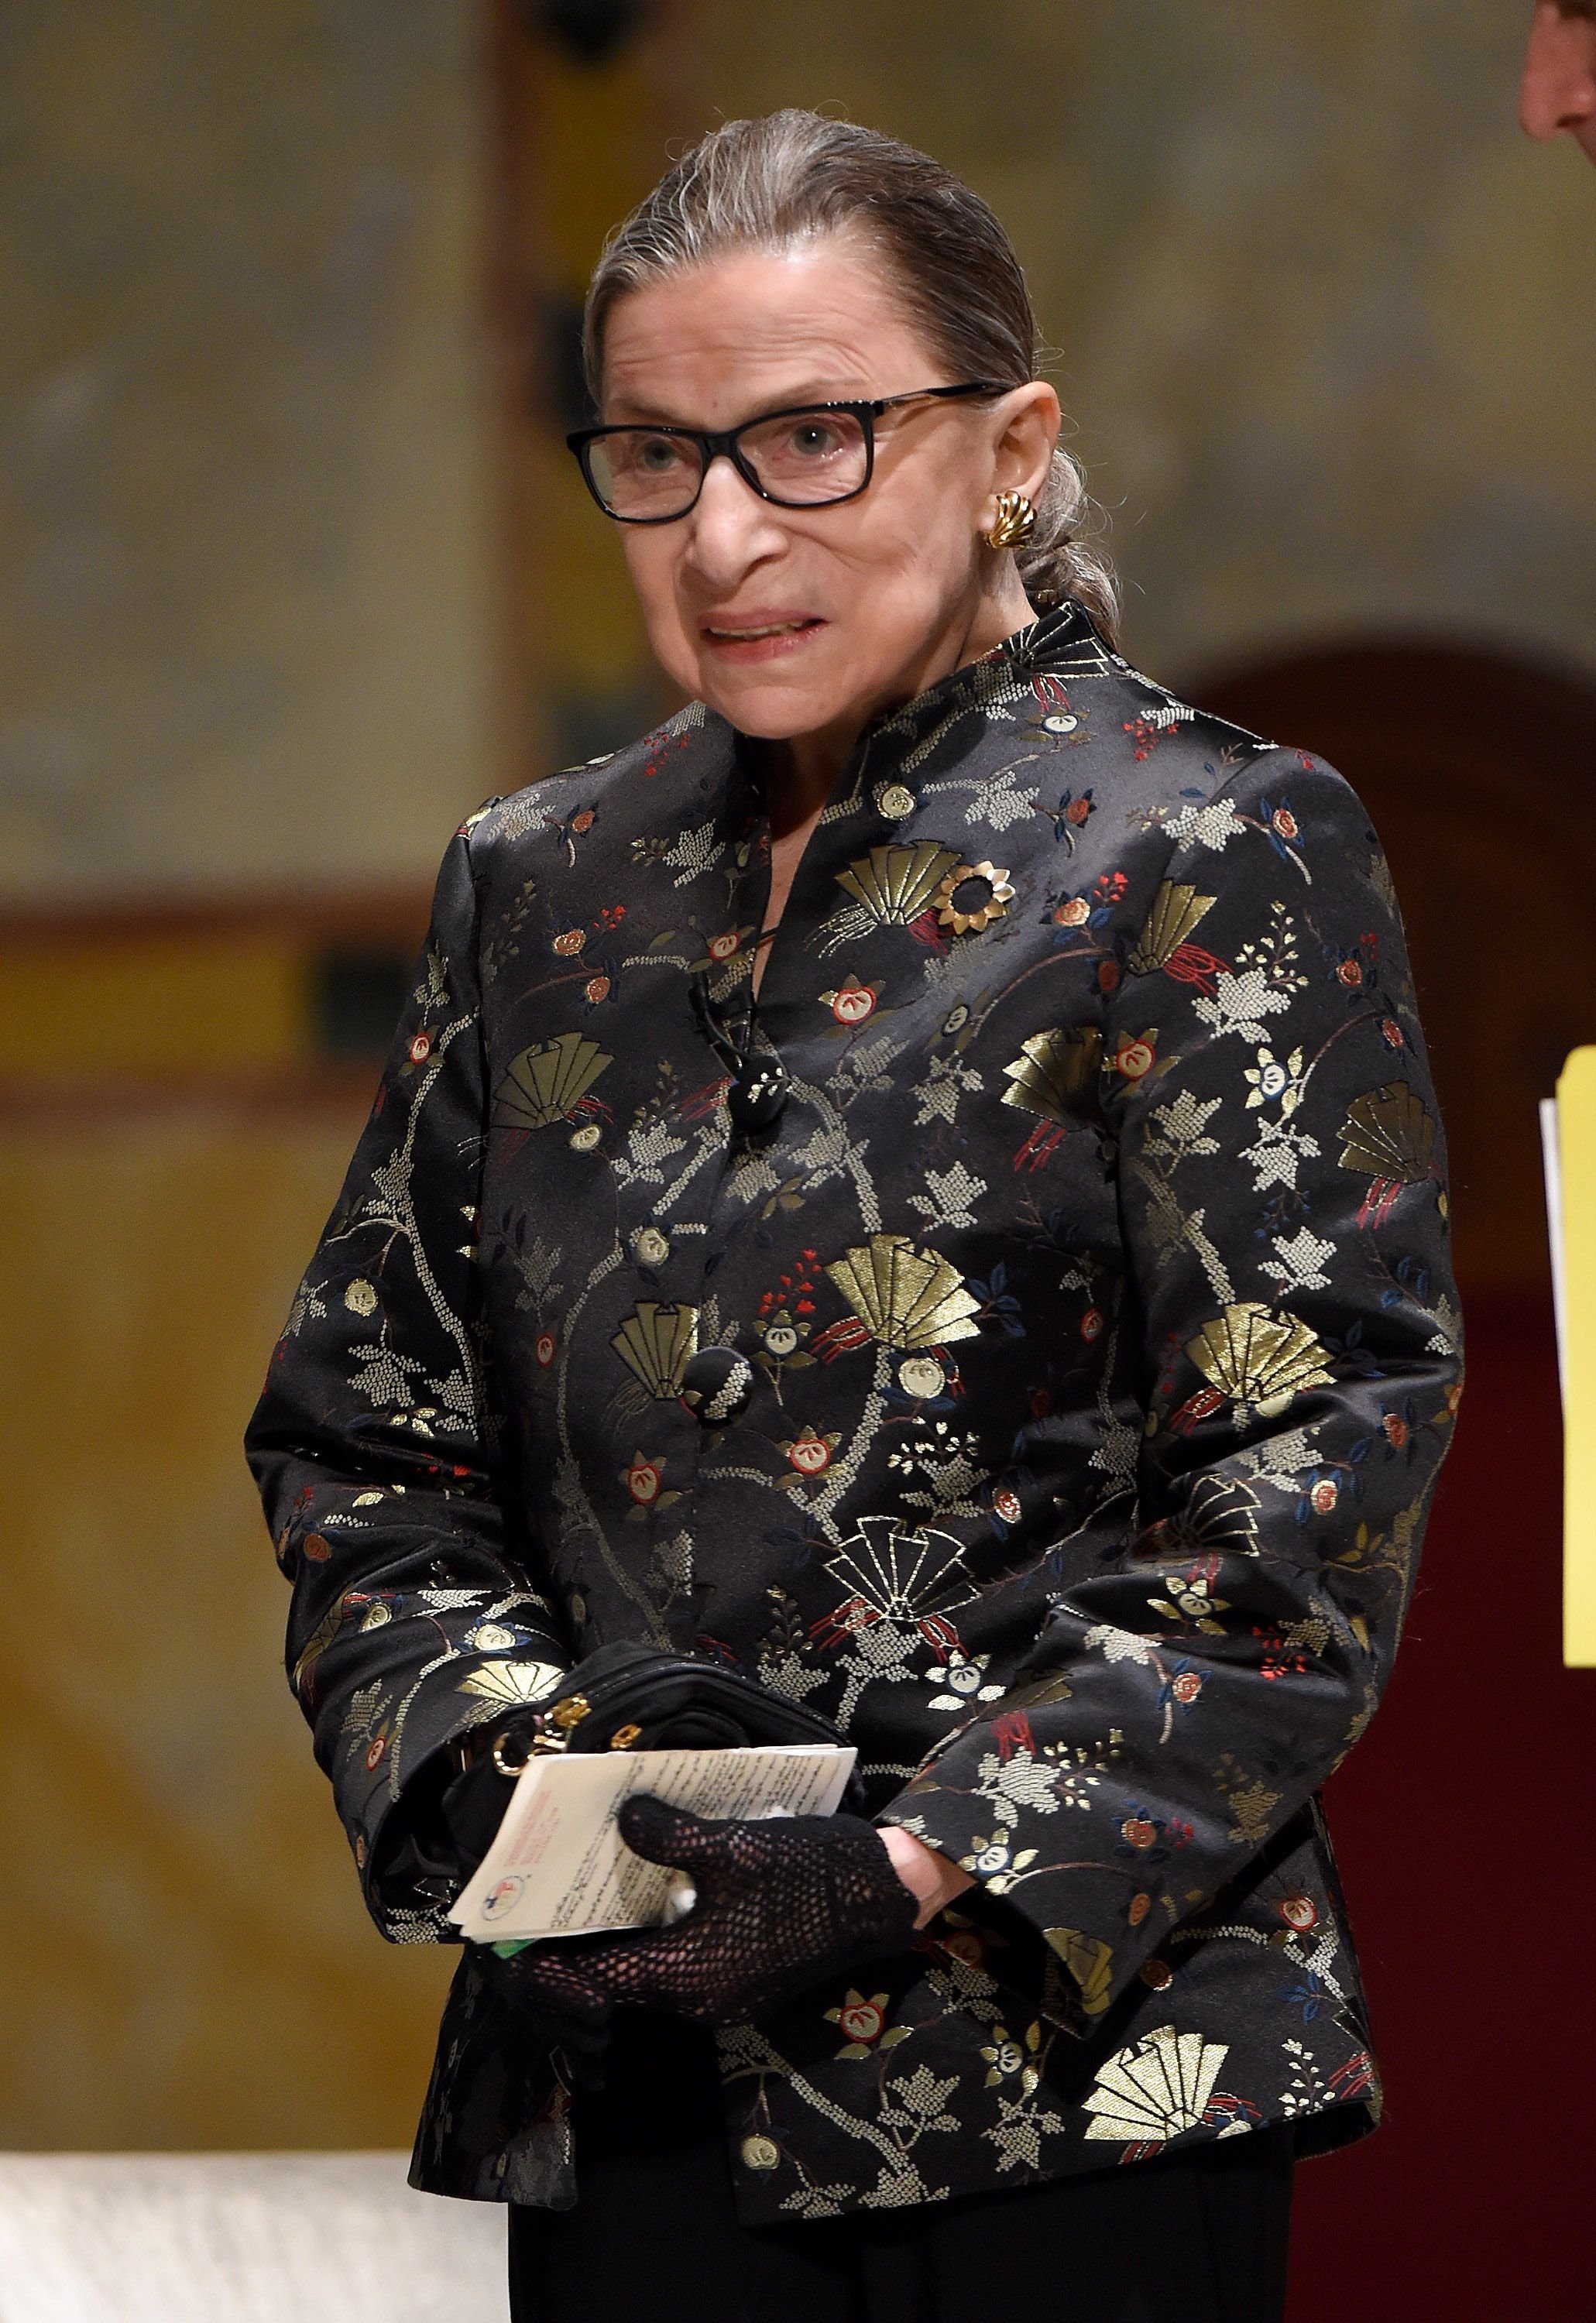 Ruth Bader Ginsburg during the event A Historic Evening with Supreme Court Justice Ruth Bader Ginsburg event at the Temple Emanu-El Skirball Center on September 21, 2016 in New York City. | Source: Getty Images